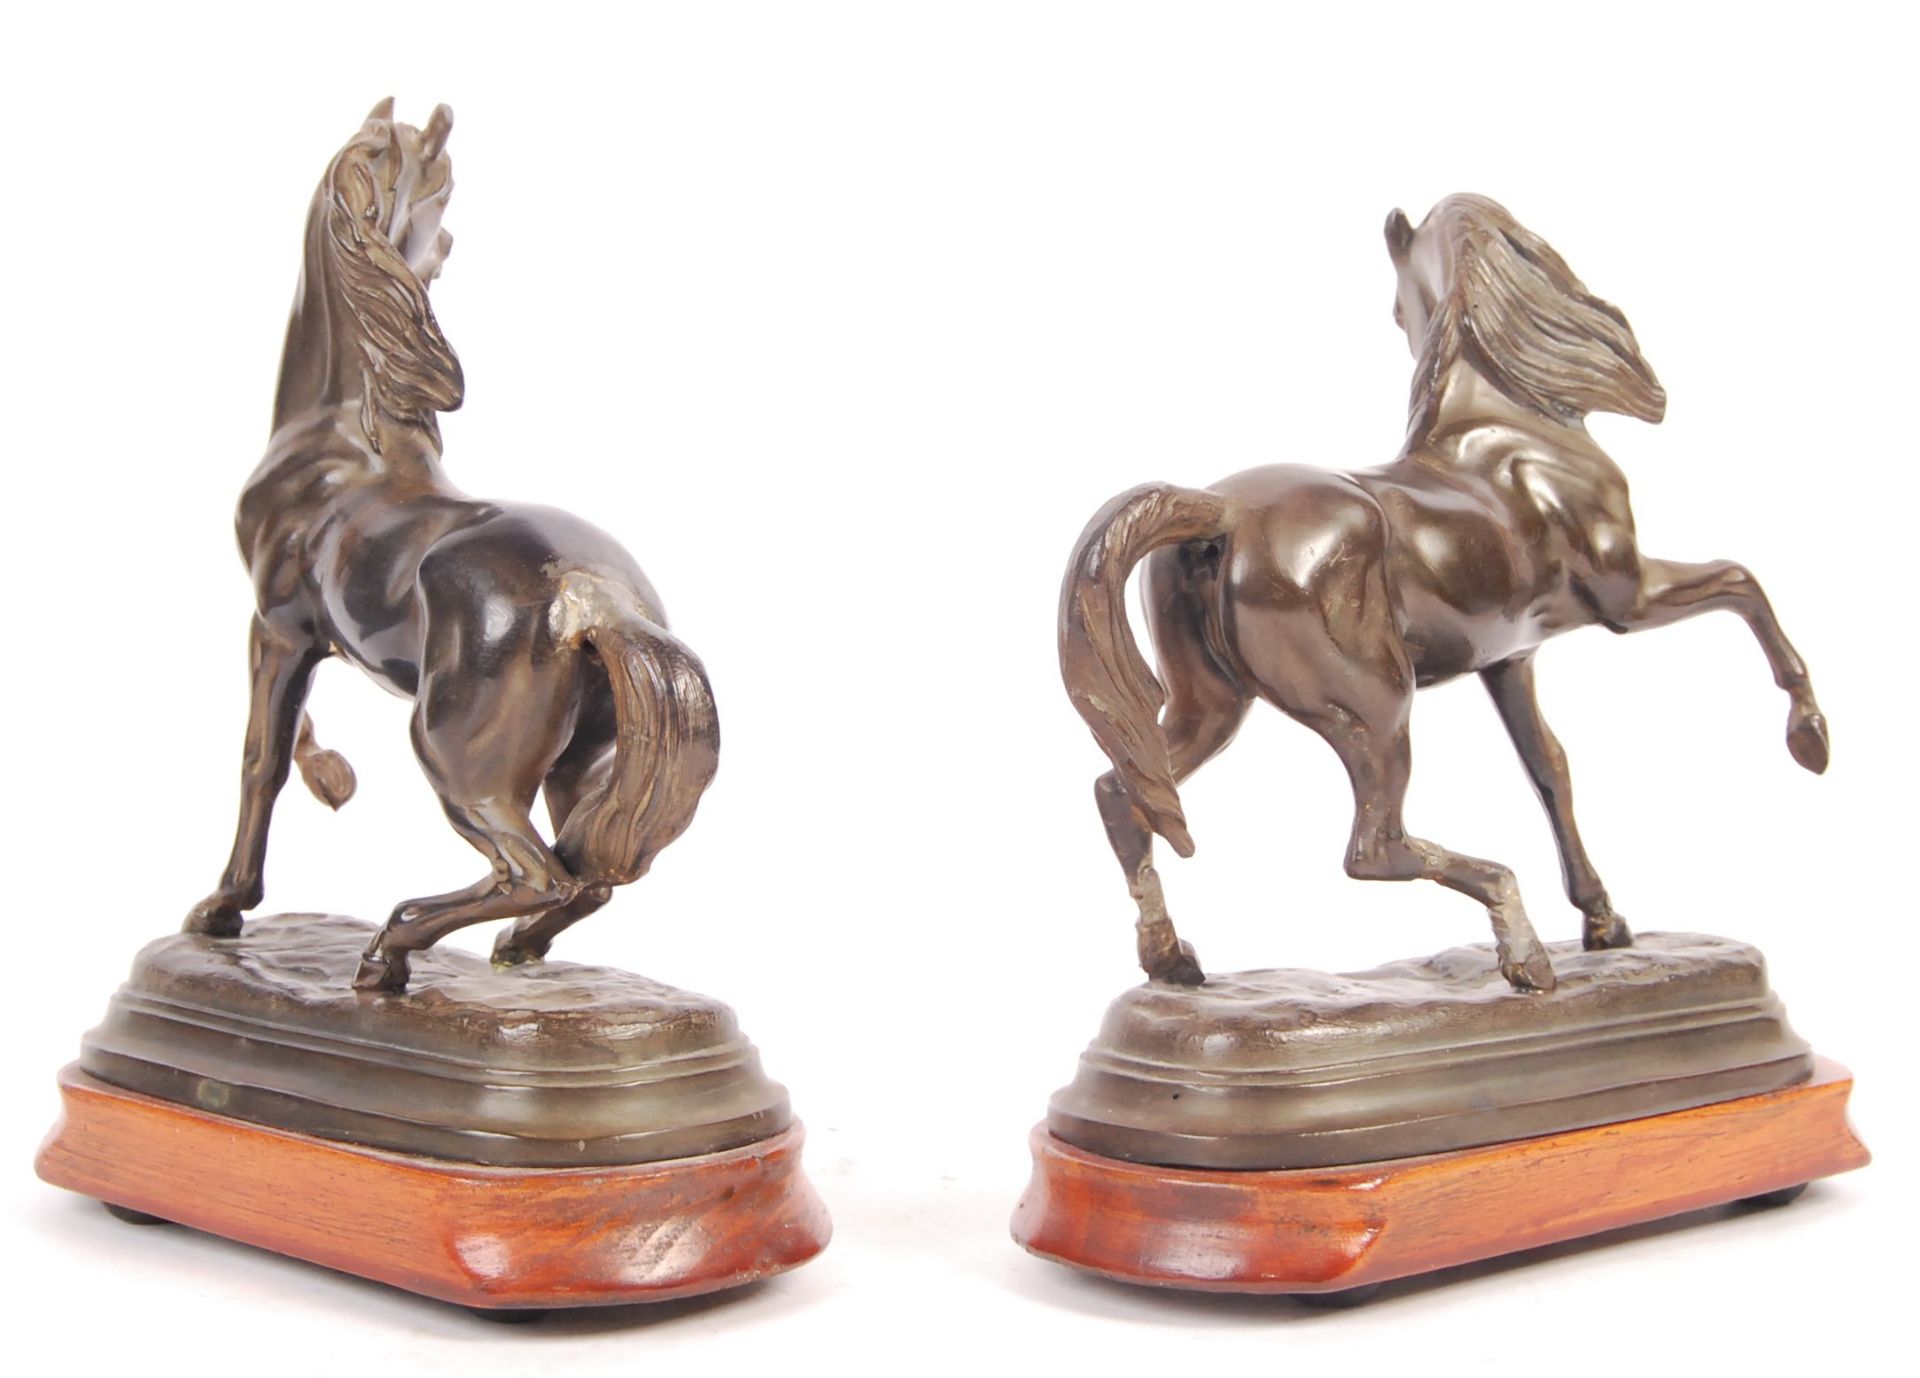 PAIR OF ANTIQUE FRENCH BRONZES BY PAUL EDOUARD DELABRIERRE - Image 2 of 5